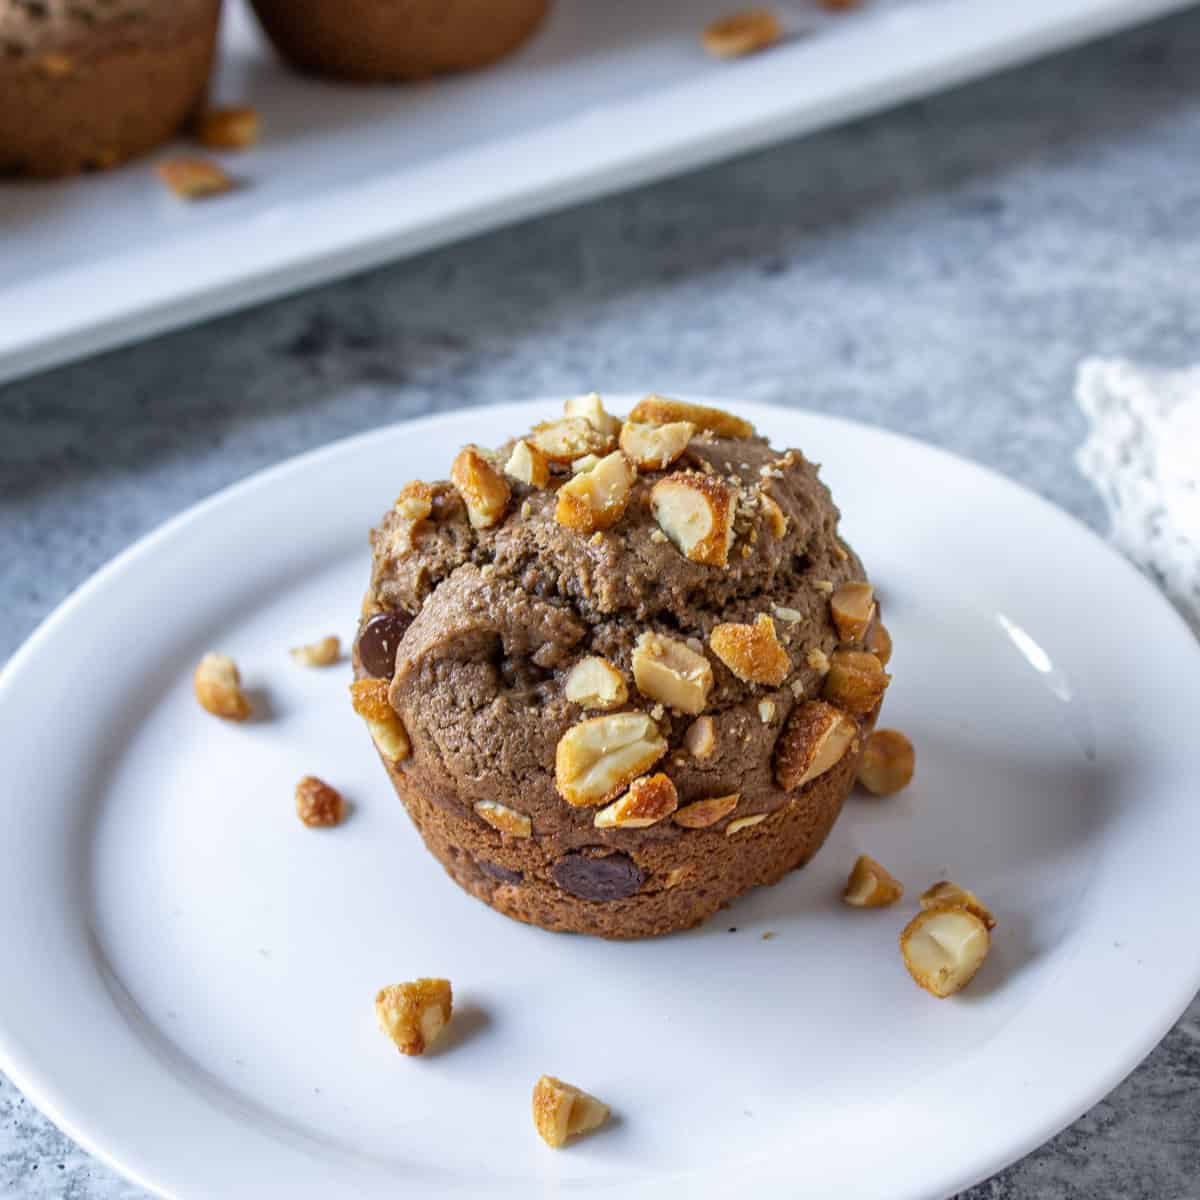 A chocolate muffin topped with peanuts on a white plate.